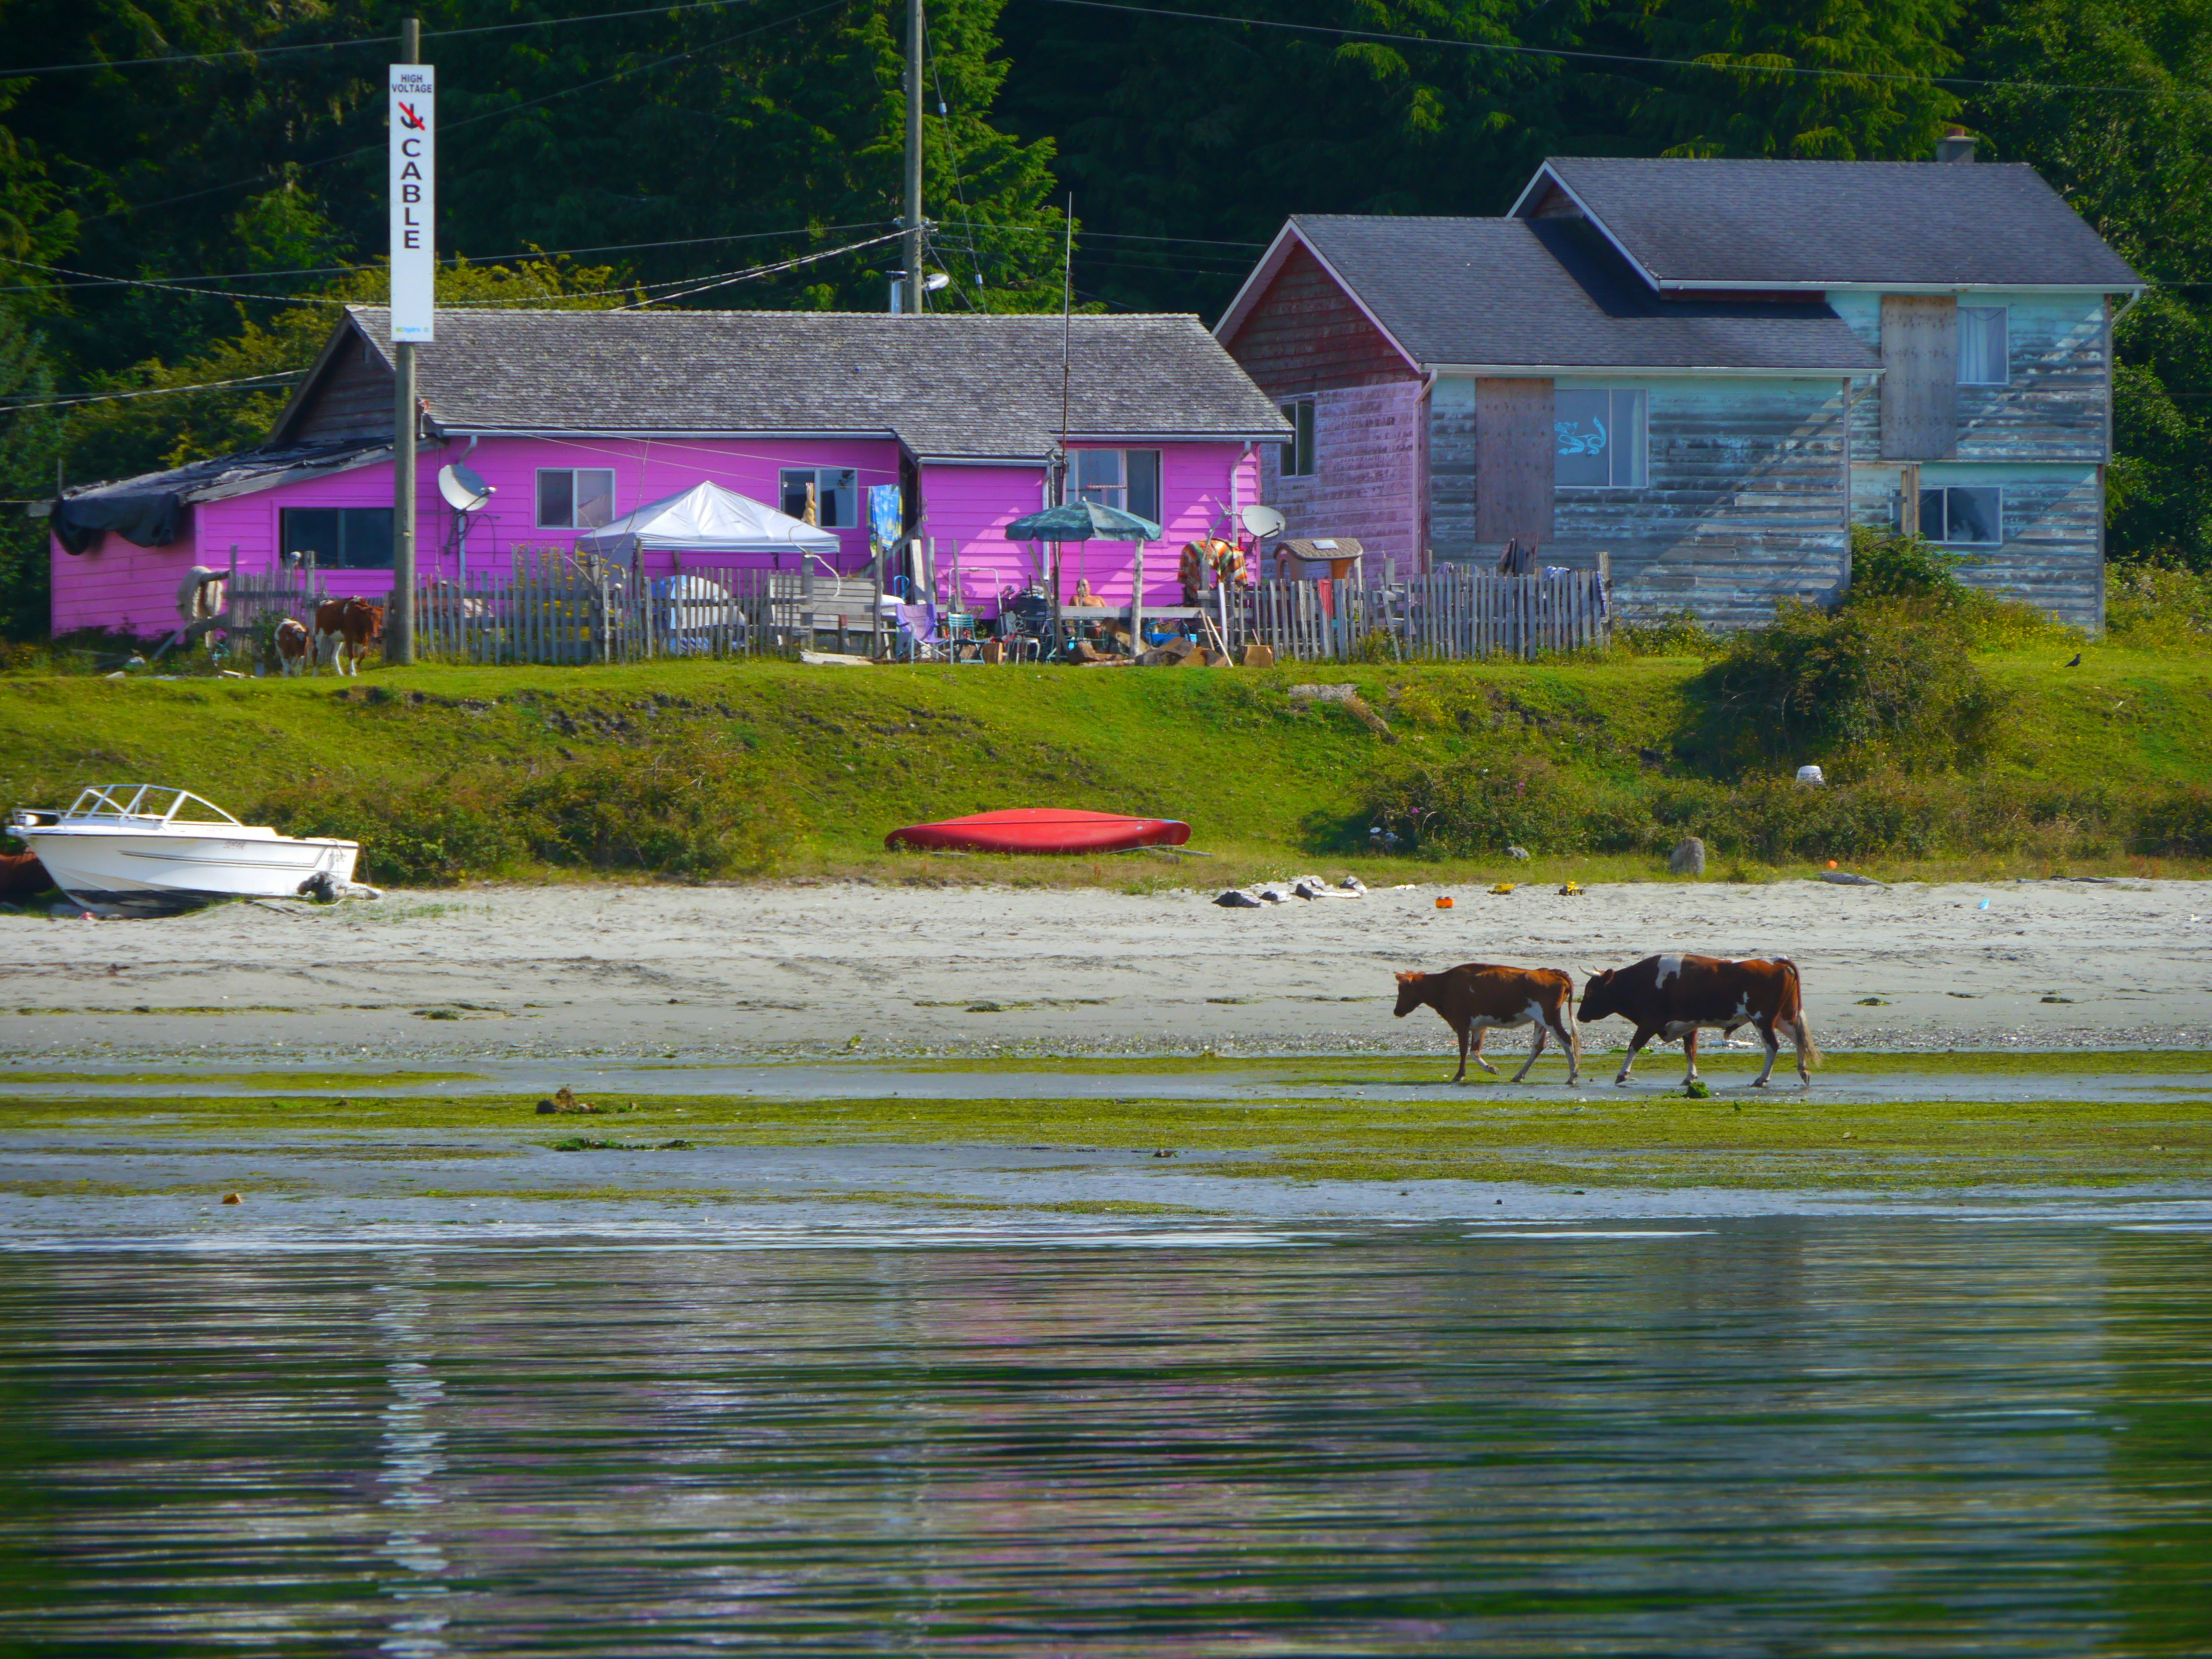 A brown and white cow and a matching bull walk through the low tide surrounded by green seaweed on Opitsaht beach near Tofino. A red kayak is overturned in the background near a small white motorboat, and a bright fuchsia building sits next to a worn, weathered wooden building with shuttered windows.